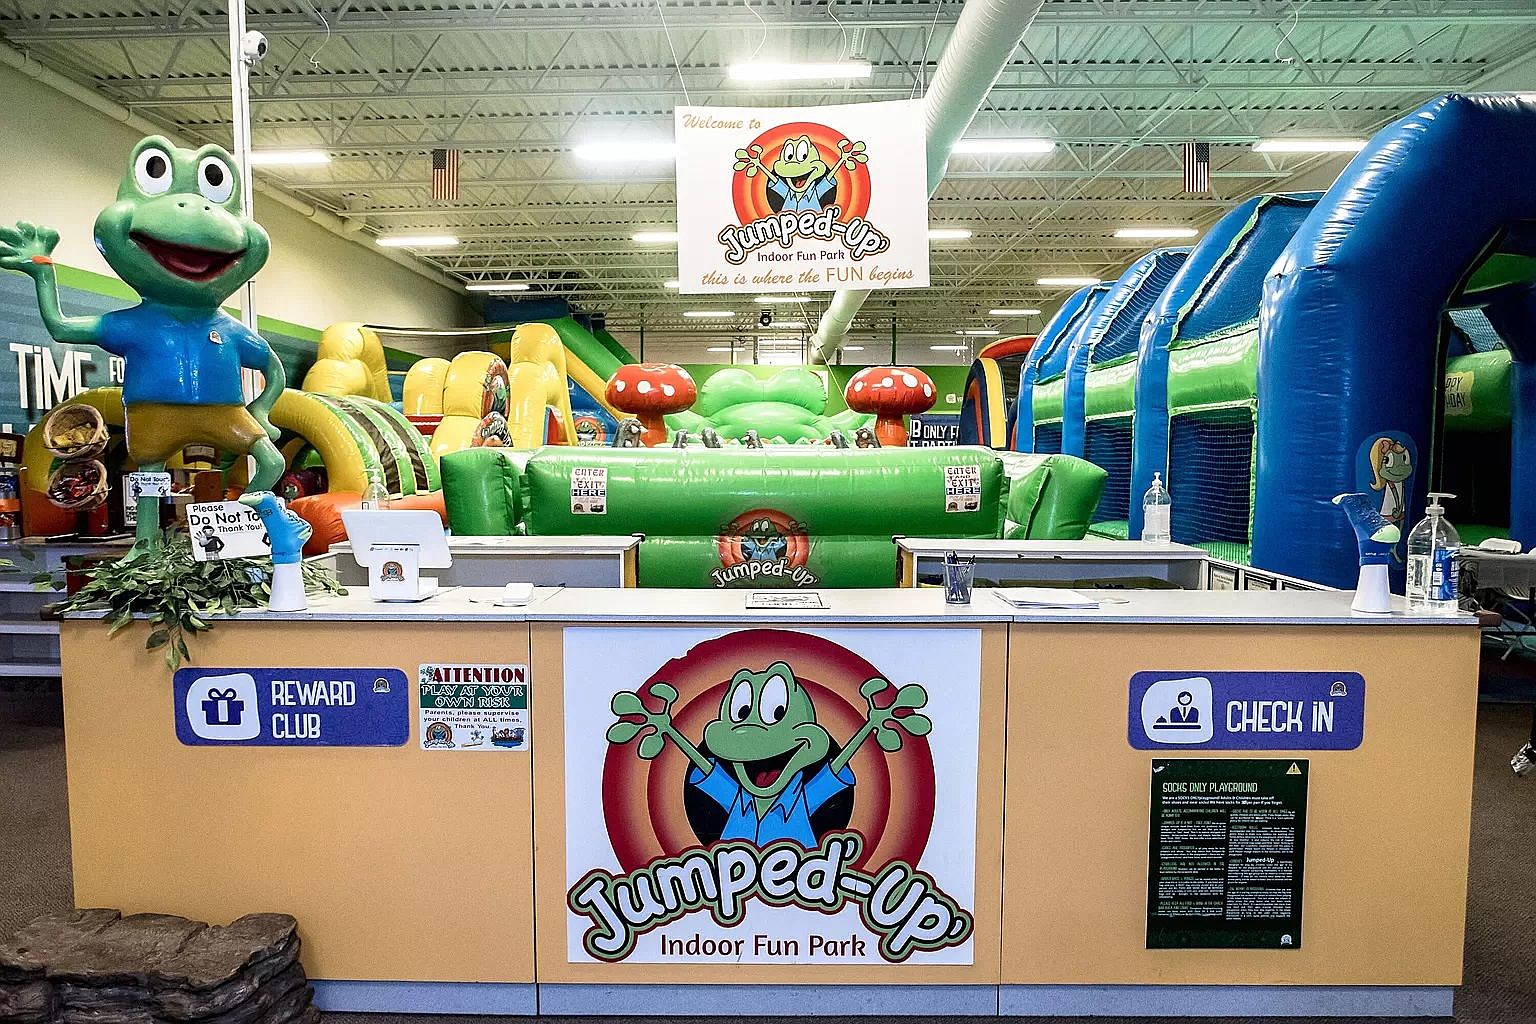 It will be an emotional day for us': Bismarck's Super Slide Amusement Park  up for sale